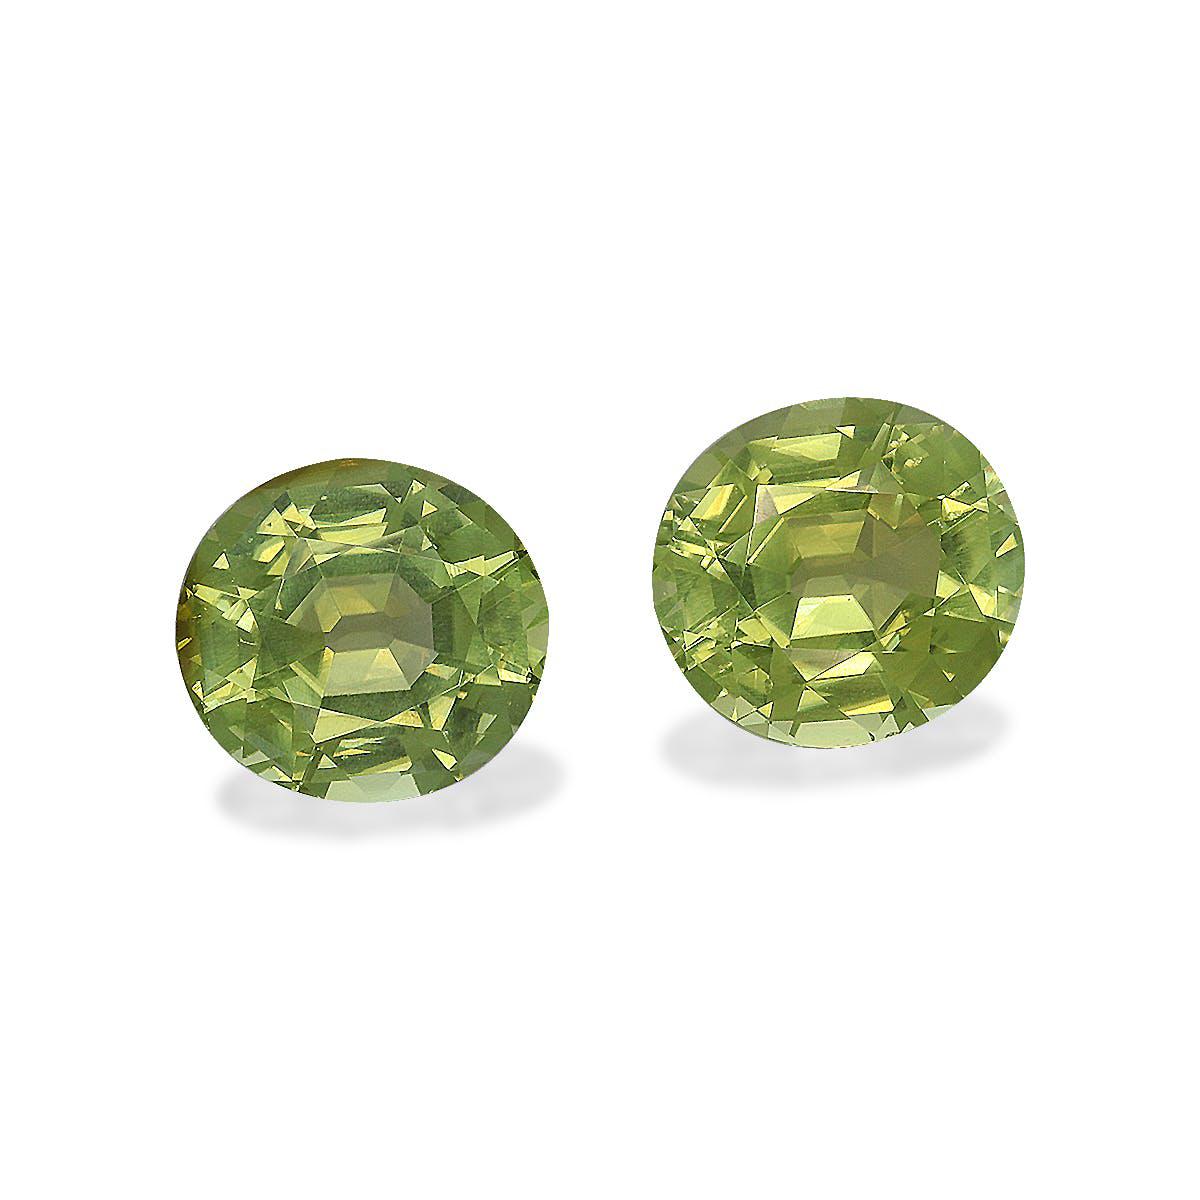 Picture of Pale Green Cuprian Tourmaline 9.26ct - Pair (MZ0254)